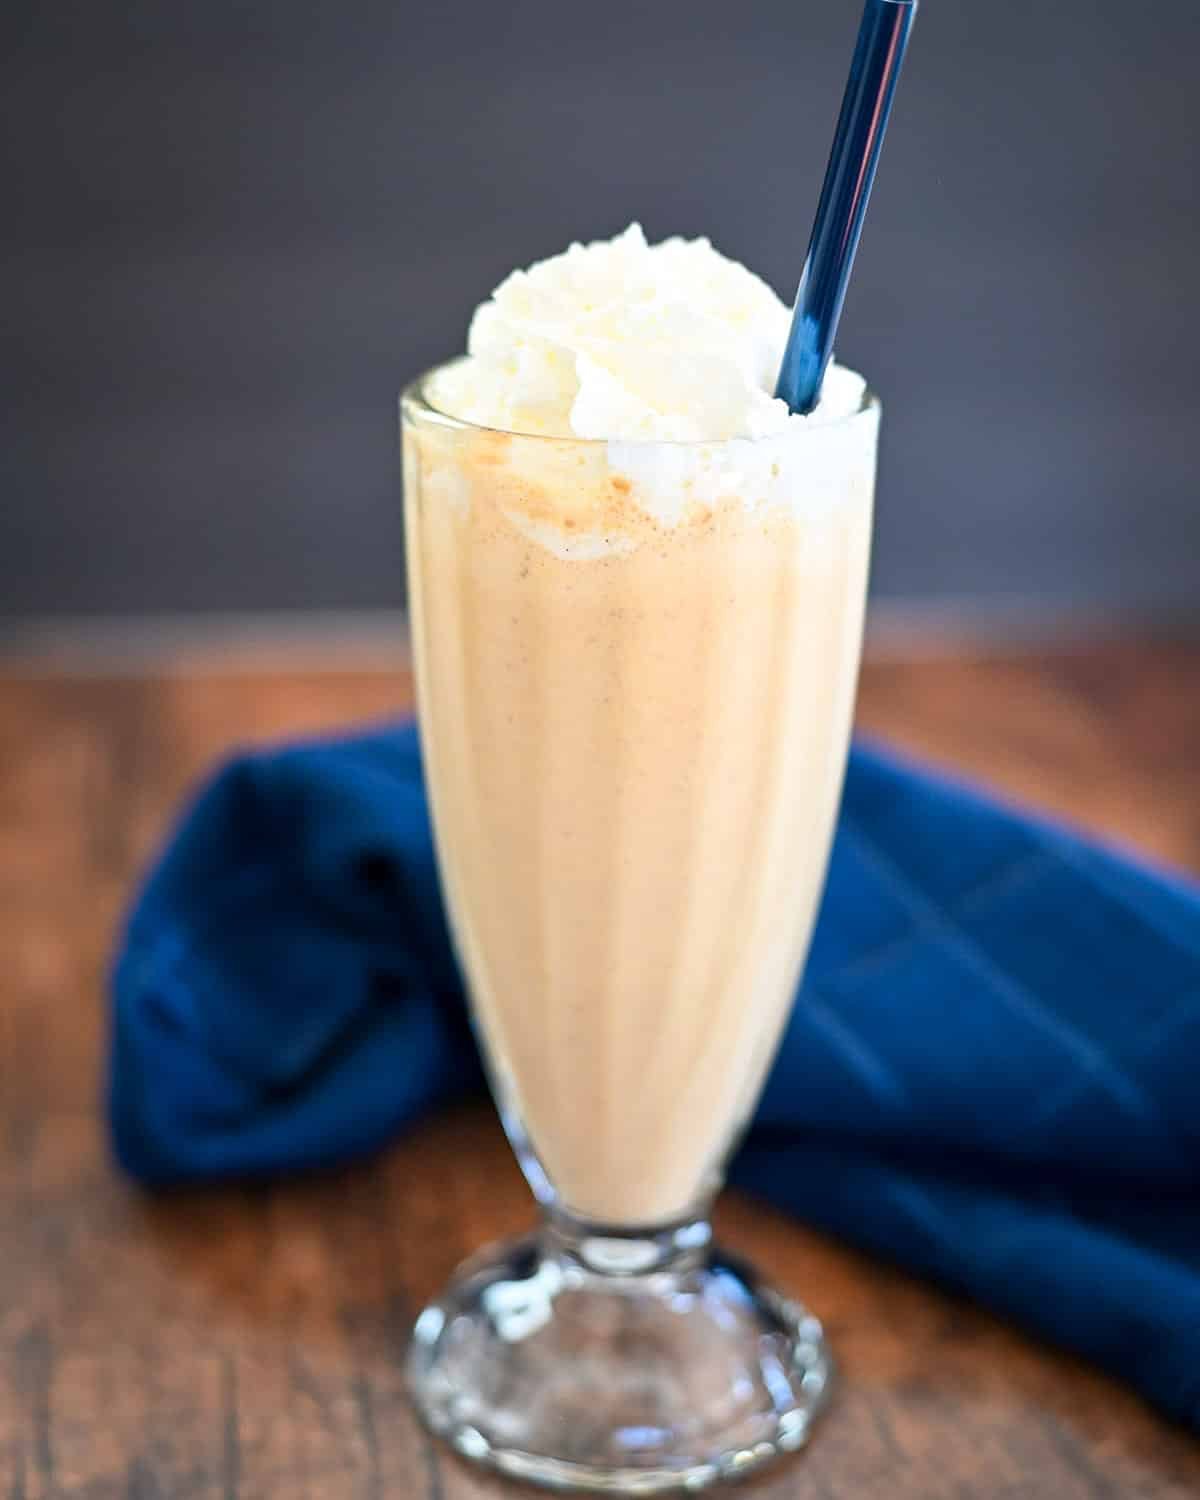 Pumpkin Milkshake in a glass with a blue straw next to a blue towel.